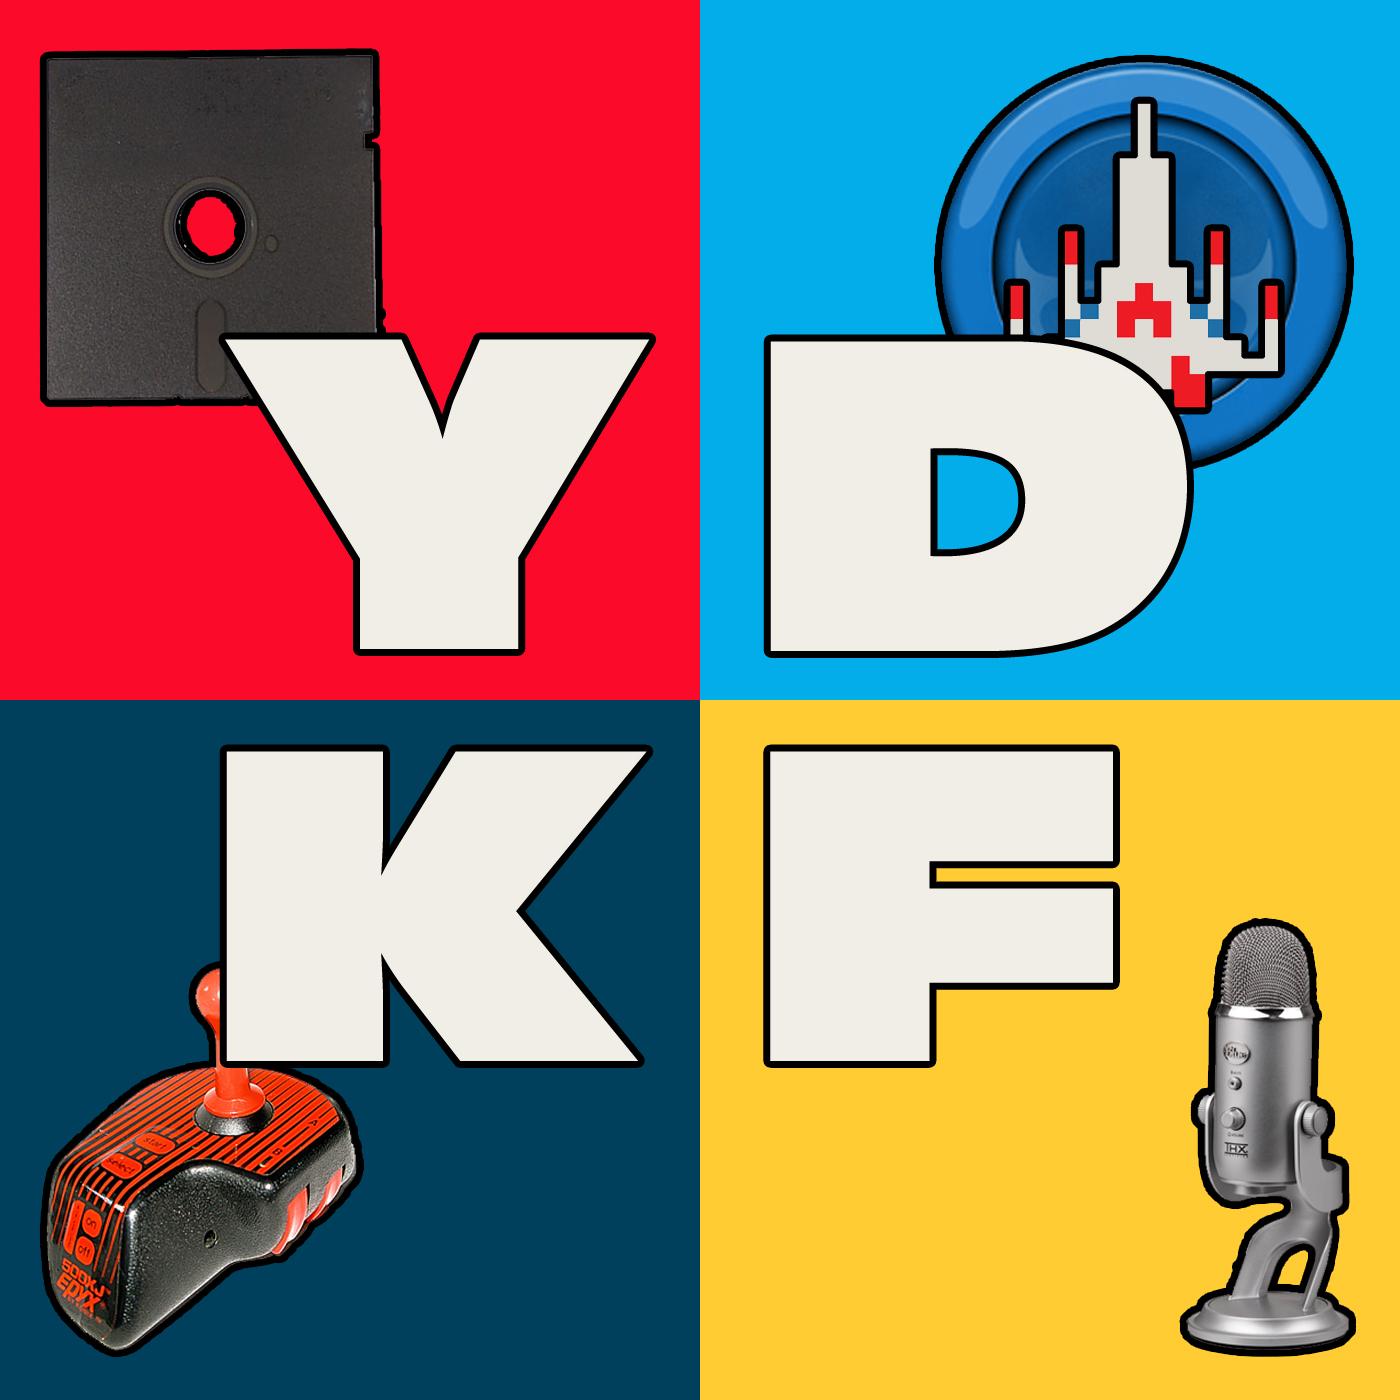 YDKF Episode 235: Things I Wanted to Be When I Grew Up